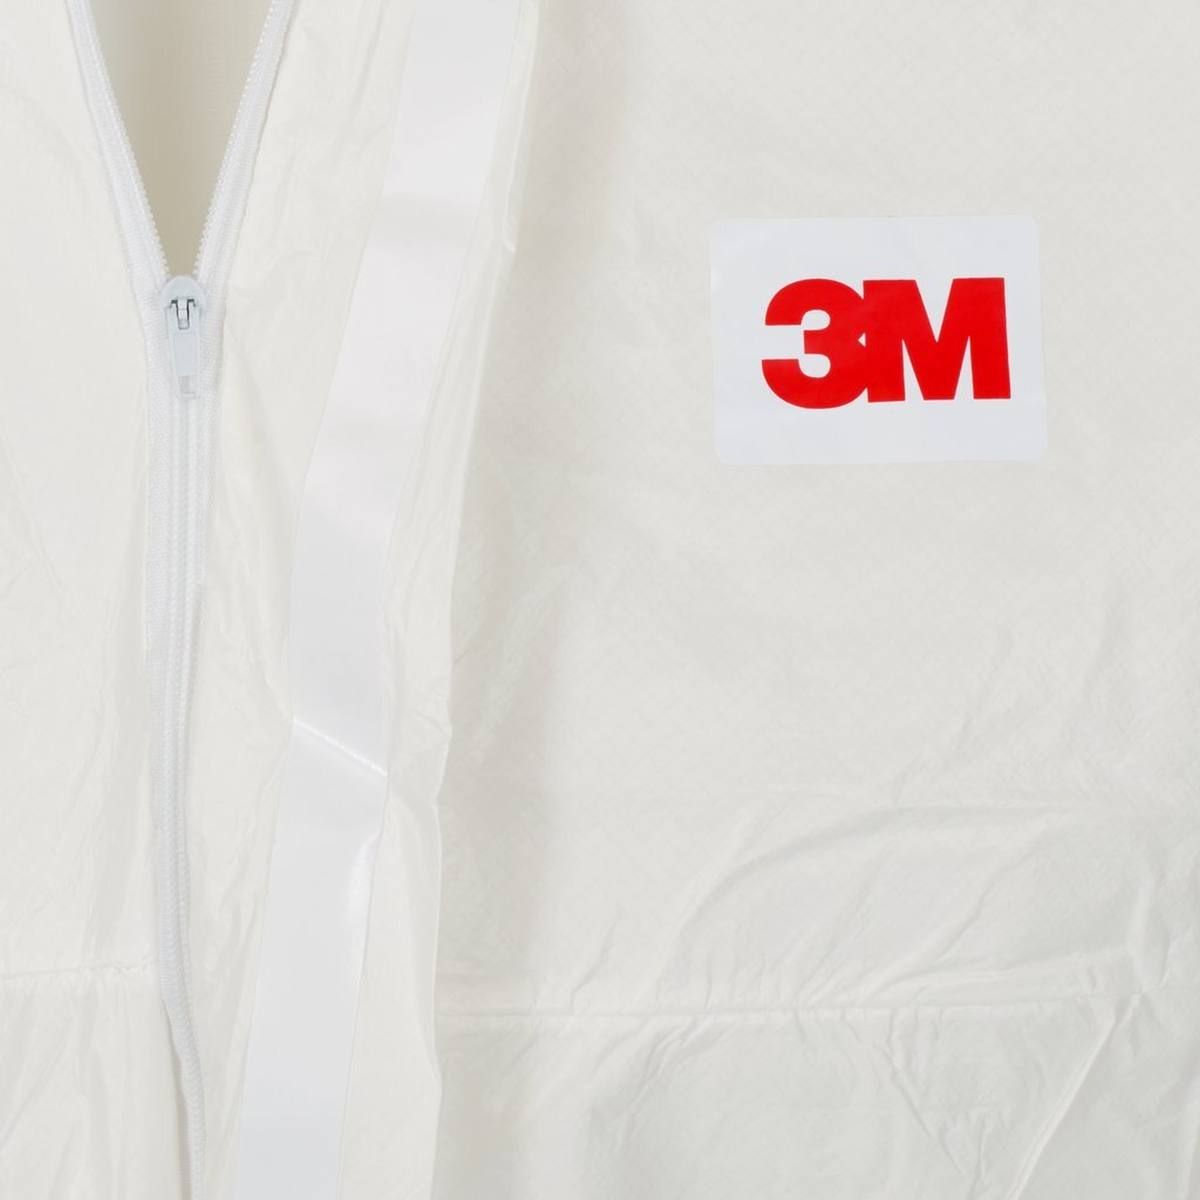 3M 4540+ coverall, white+blue, type 5/6, size 3XL, robust, lint-free, reinforced seams, SMMMS material, breathable, detachable zipper, knitted cuffs